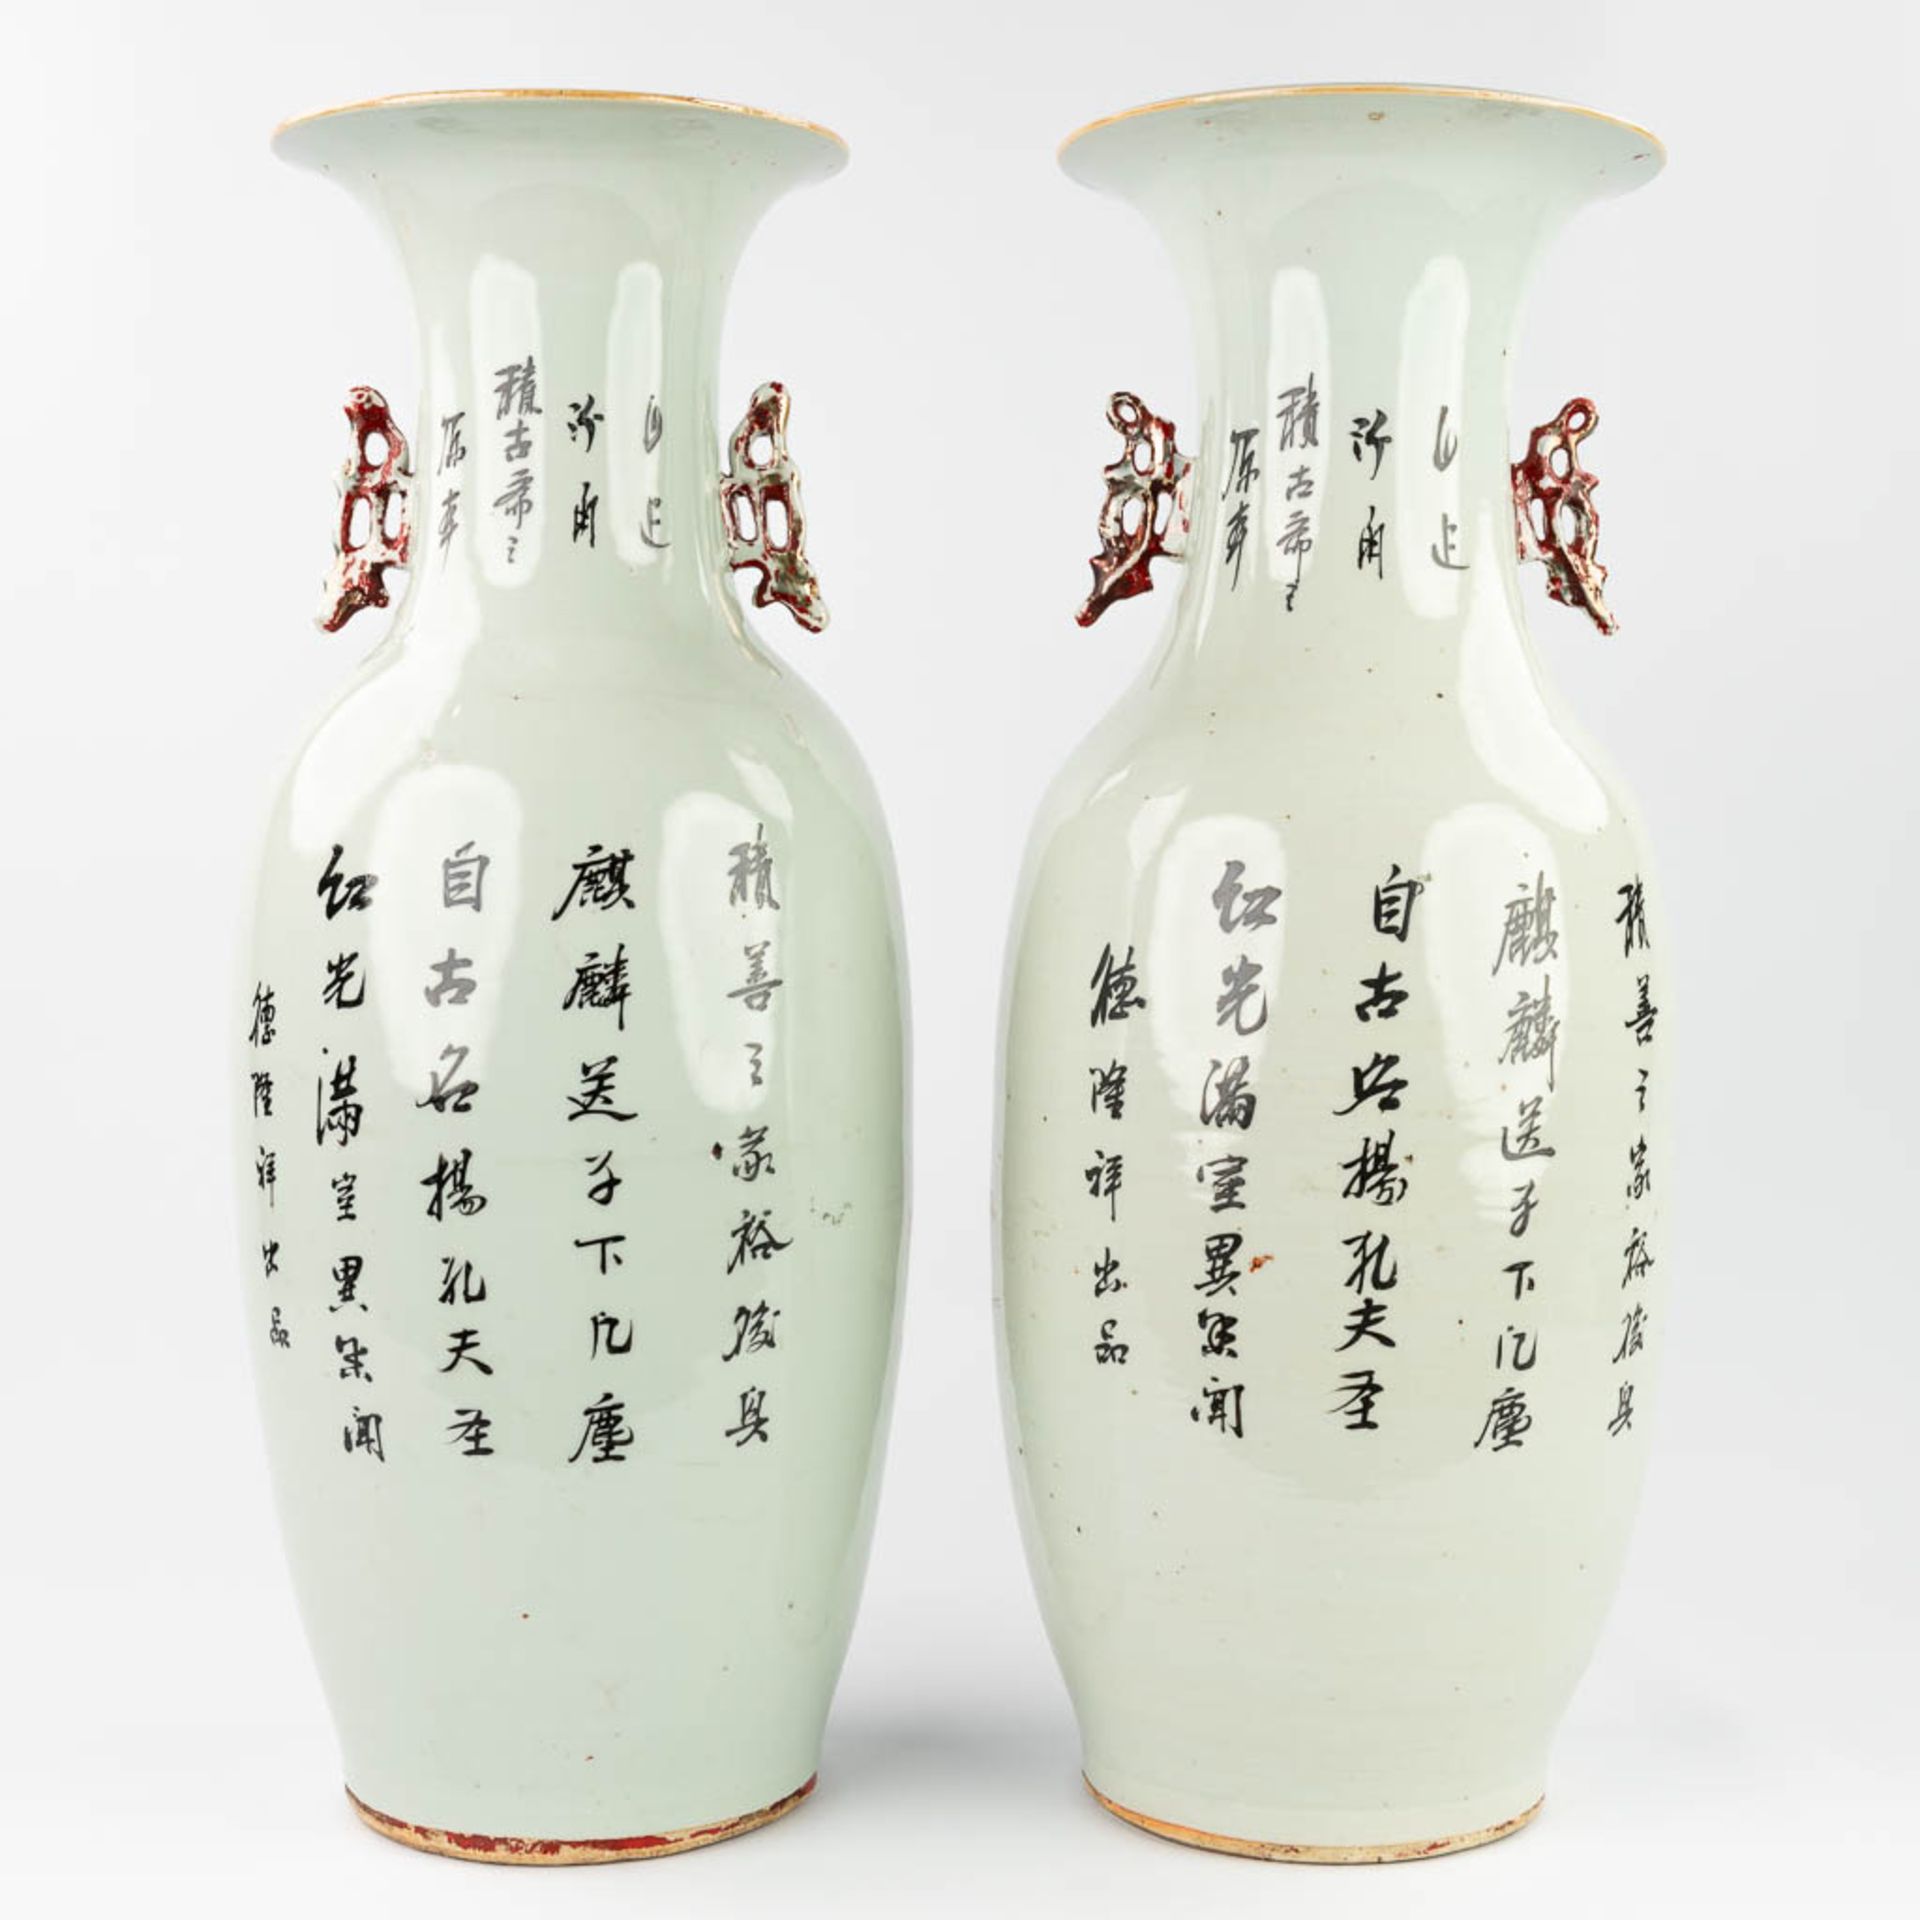 A pair of Chinese vases made of porcelain and decorated with mythological figurines. (58 x 22 cm) - Bild 12 aus 13